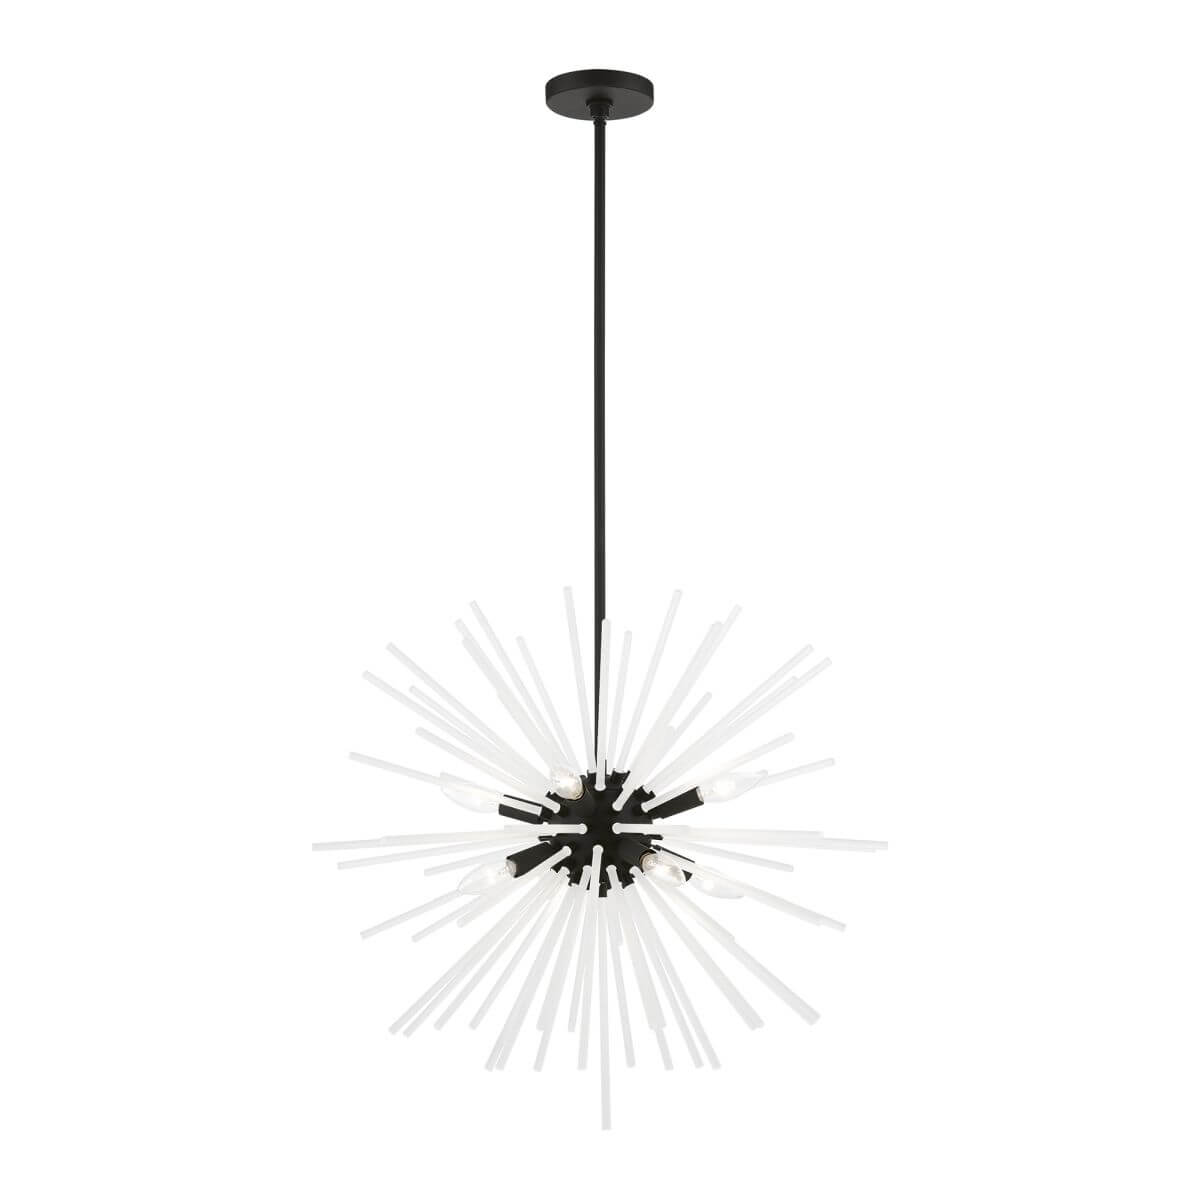 Livex 48826-04 Uptown 8 Light 26 inch Chandelier in Black with Acid Etched Rods